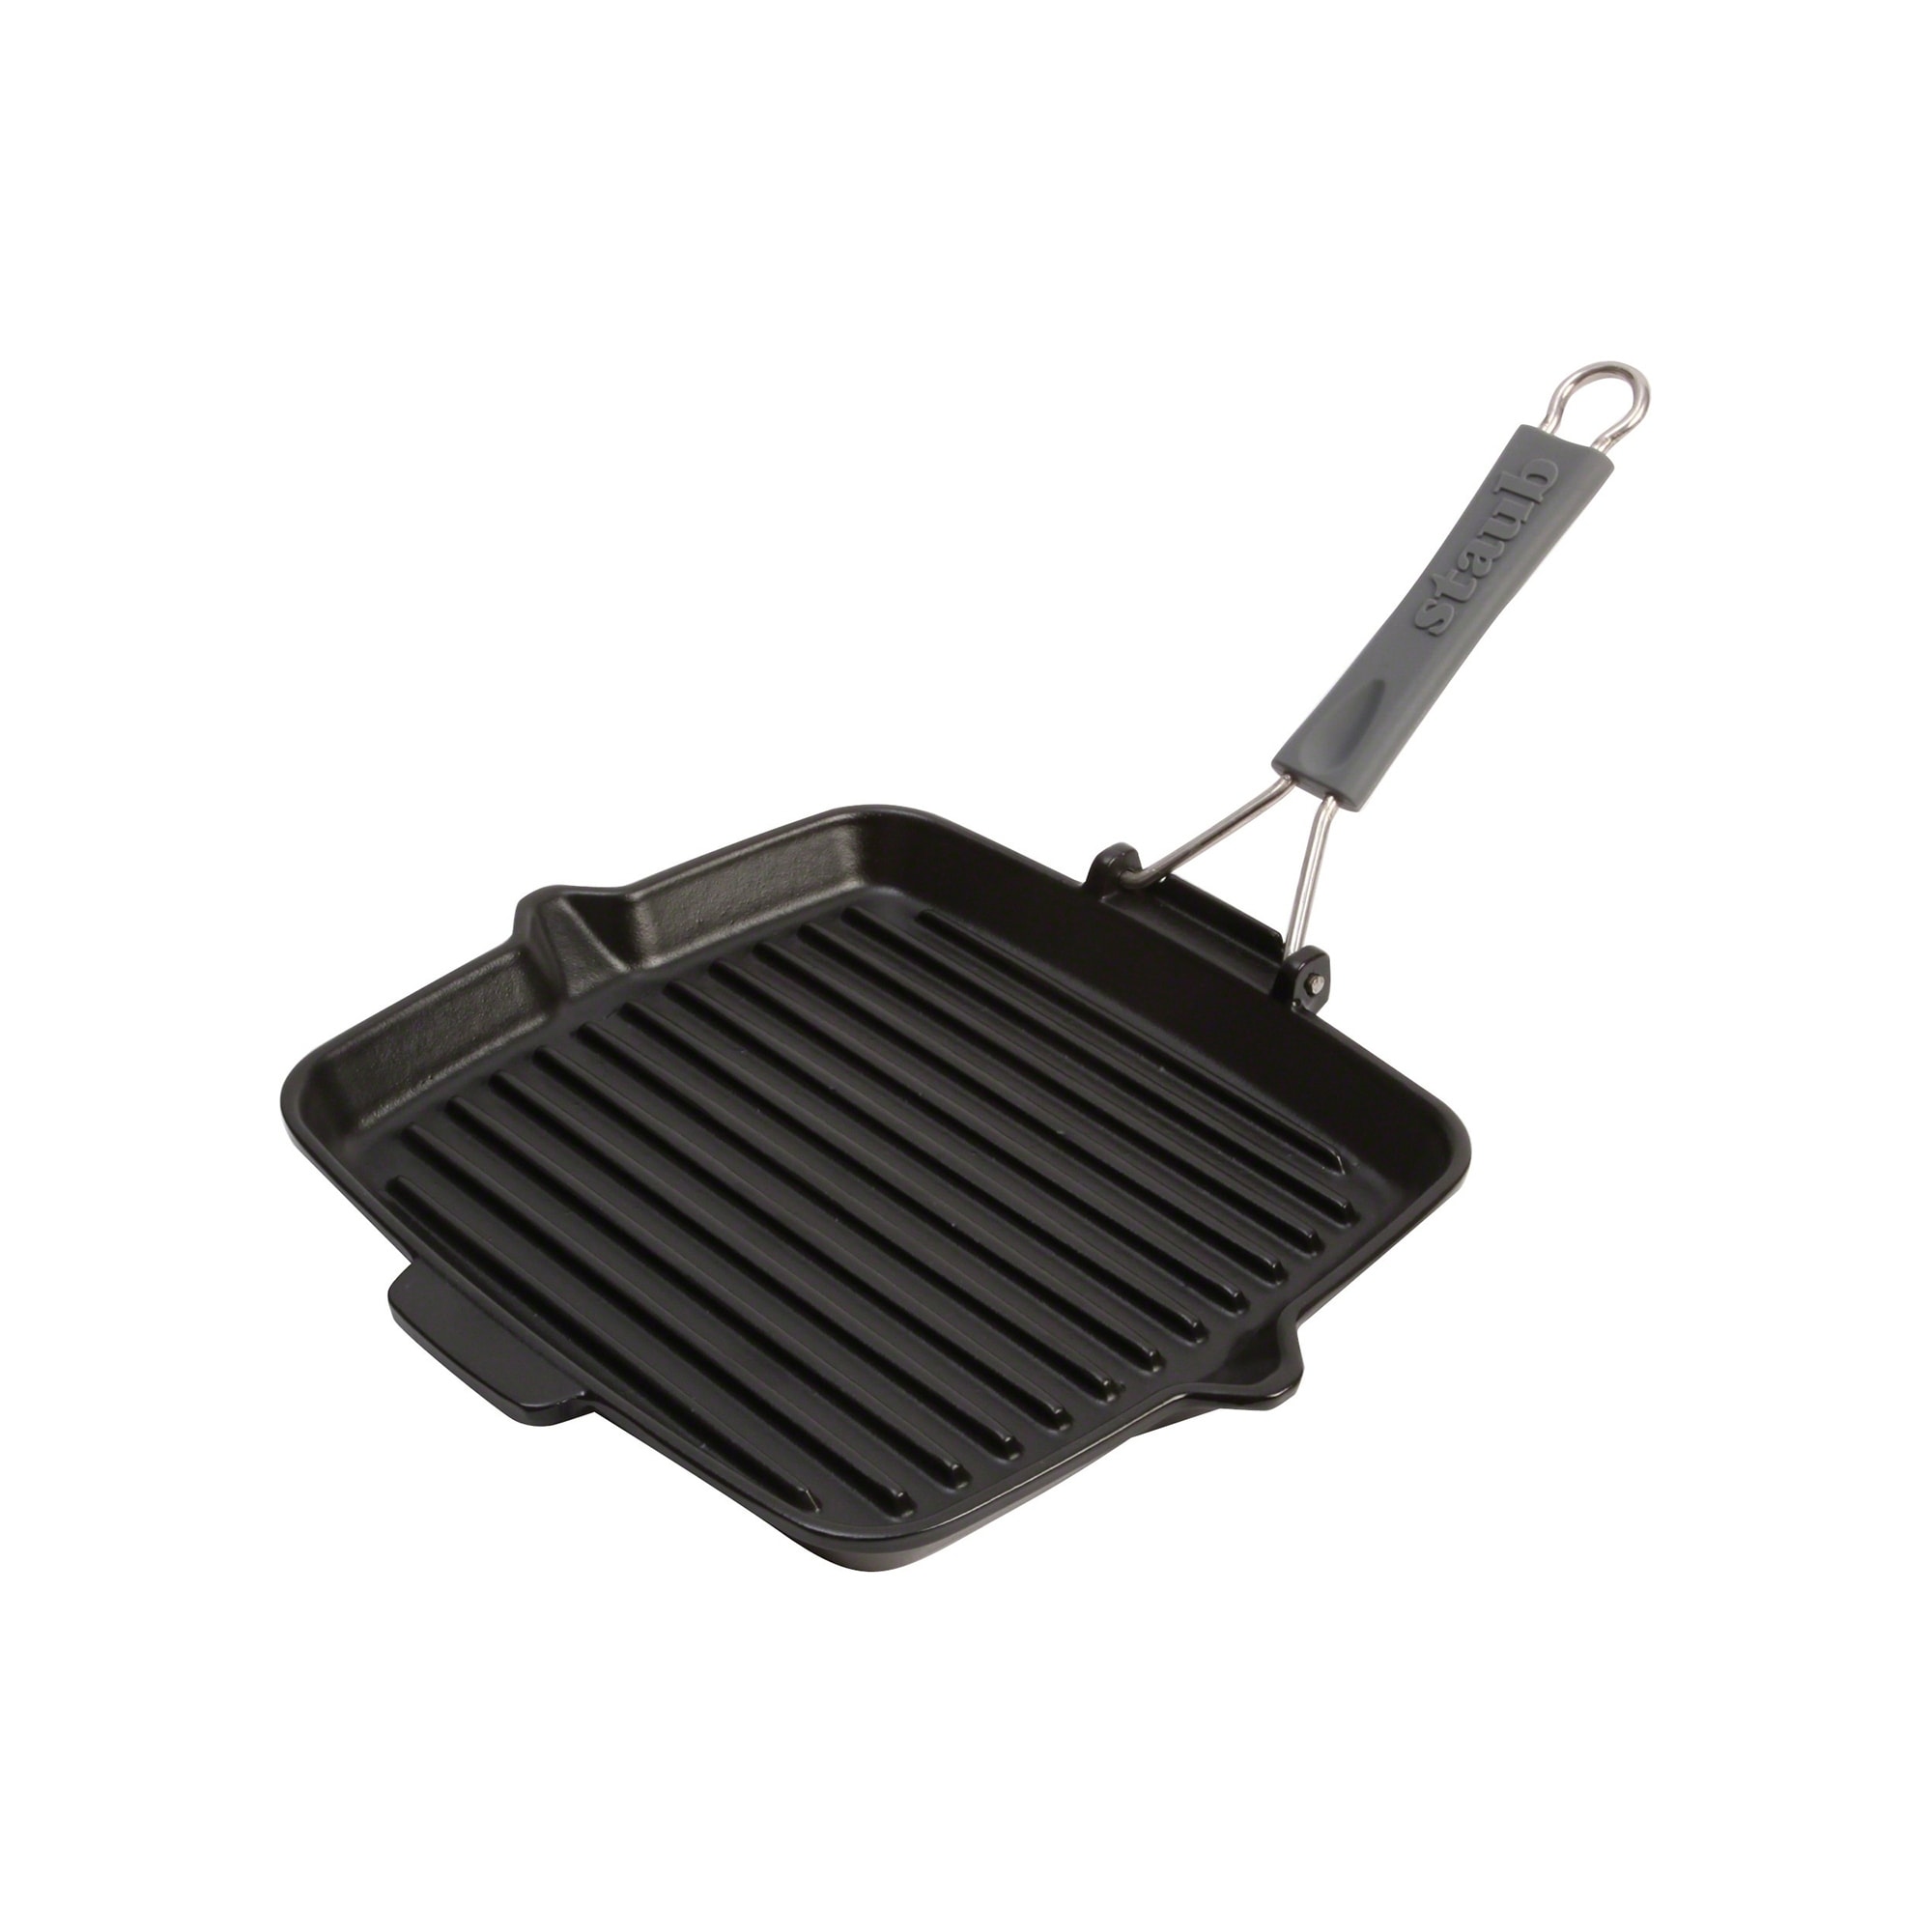 https://ak1.ostkcdn.com/images/products/is/images/direct/a98a48c32c7b5dc557a9ab7e6cd7406dda053ffd/Staub-Cast-Iron-9.5%22-Square-Folding-Grill---Matte-Black.jpg